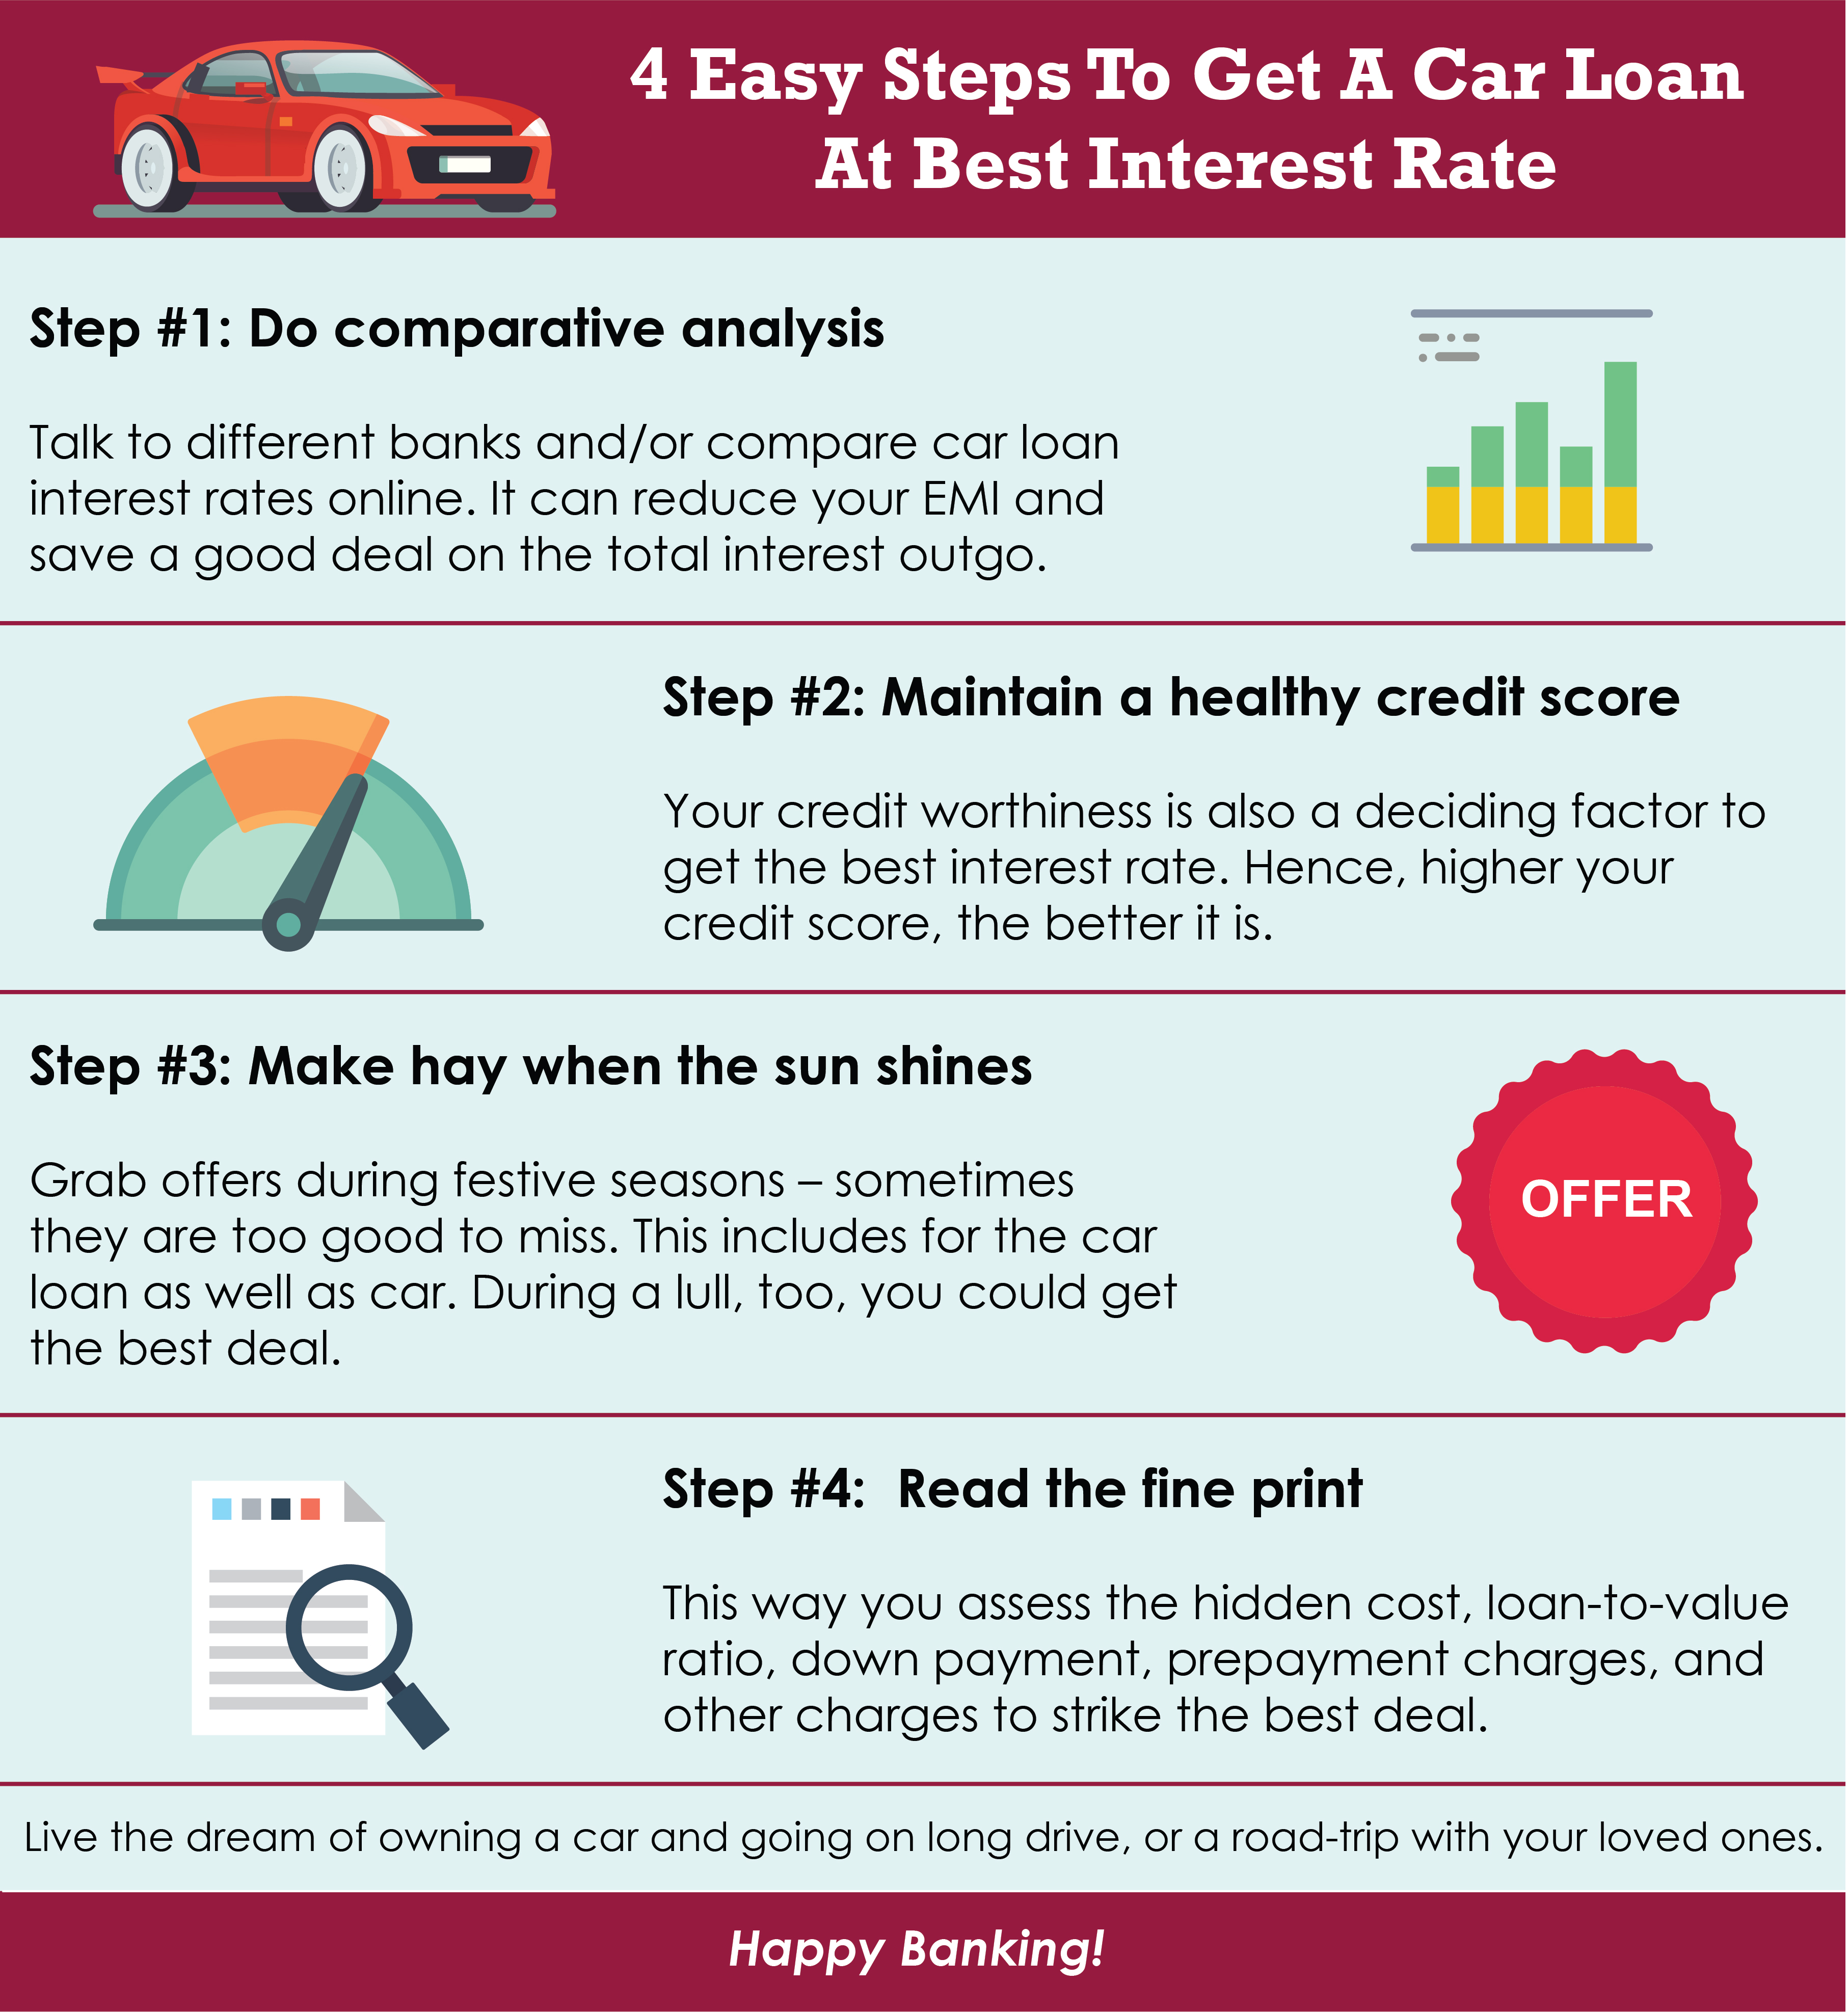 Easy Steps To Get A Car Loan At Best Interest Rates-Axis Bank